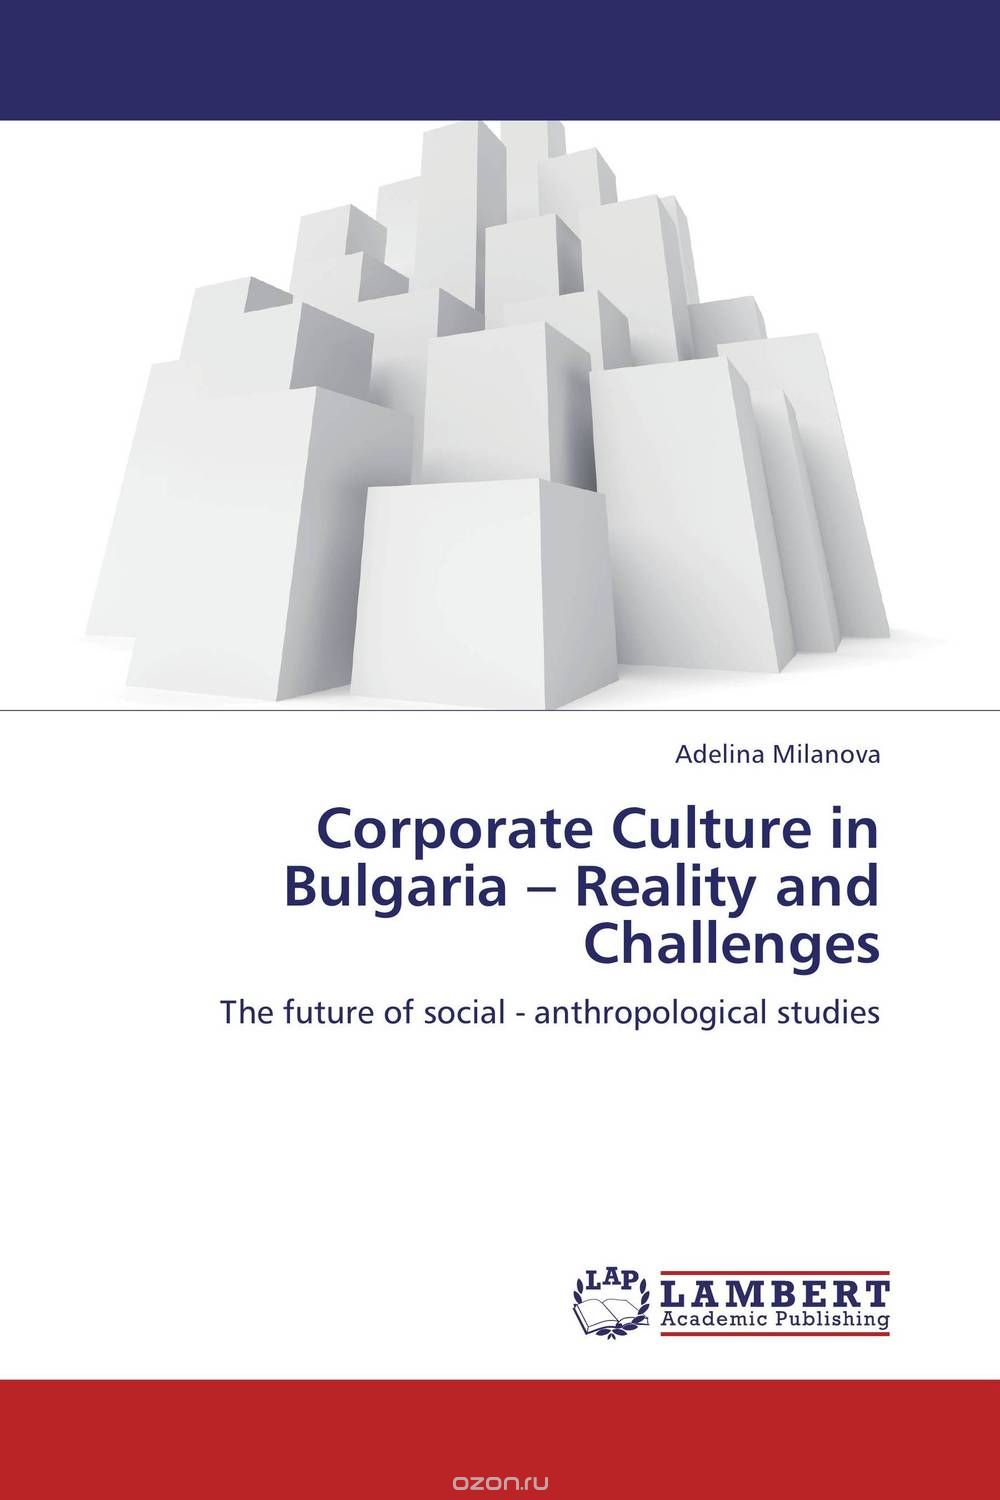 Скачать книгу "Corporate Culture in Bulgaria – Reality and Challenges"